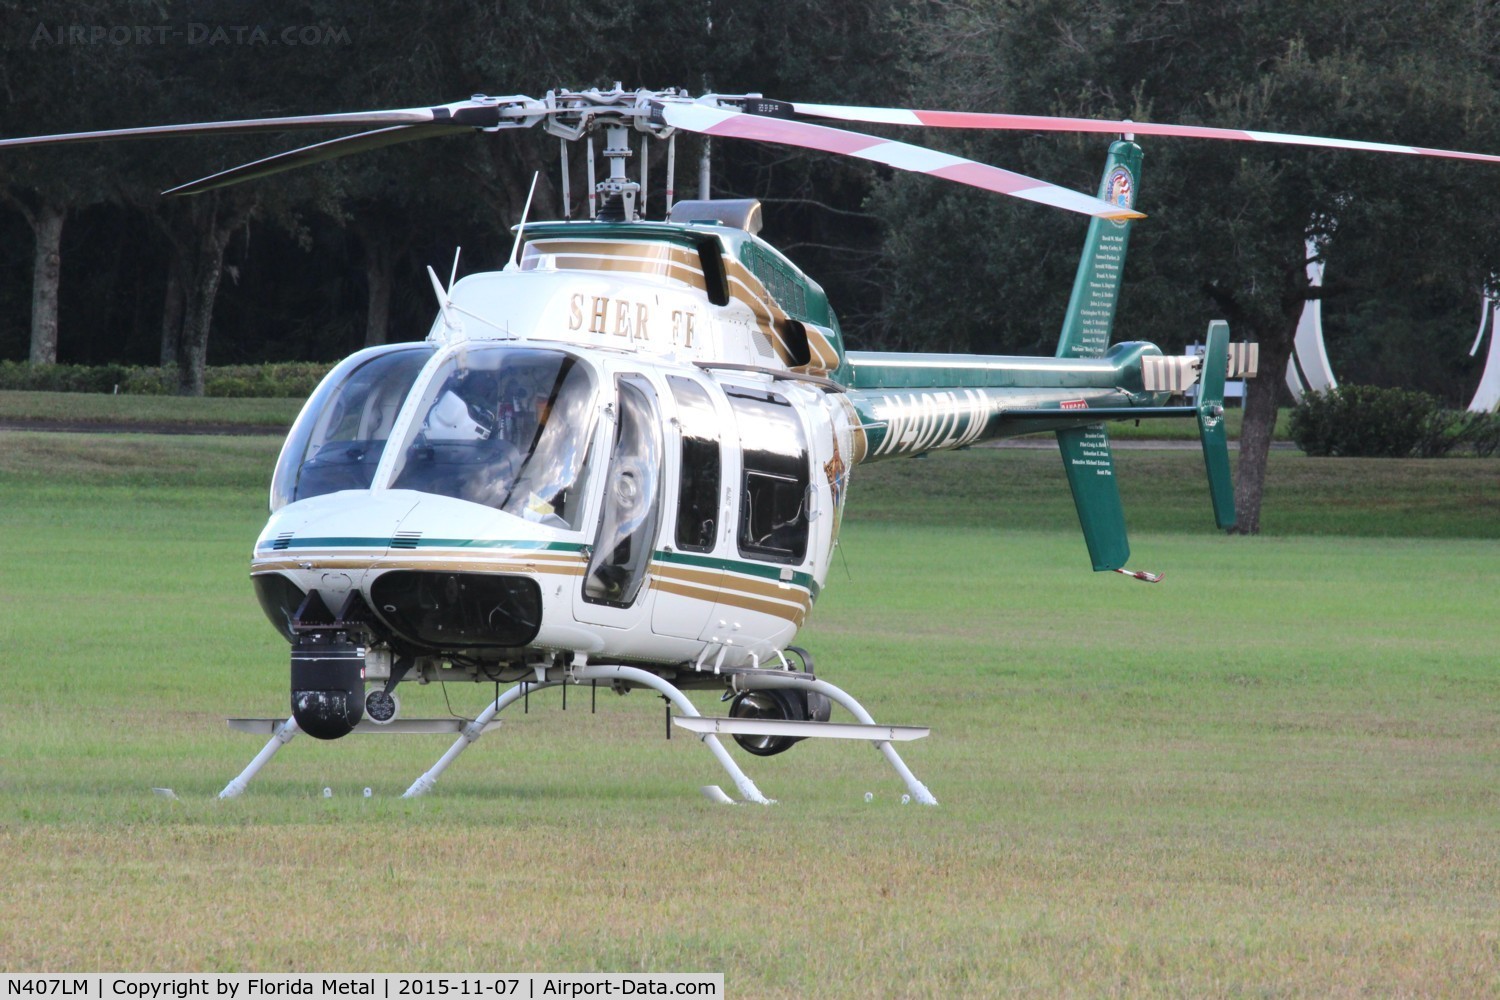 N407LM, 2007 Bell 407 C/N 53767, Orange County Sheriff at the American Heroes Helicopter Air Show Oveido FL